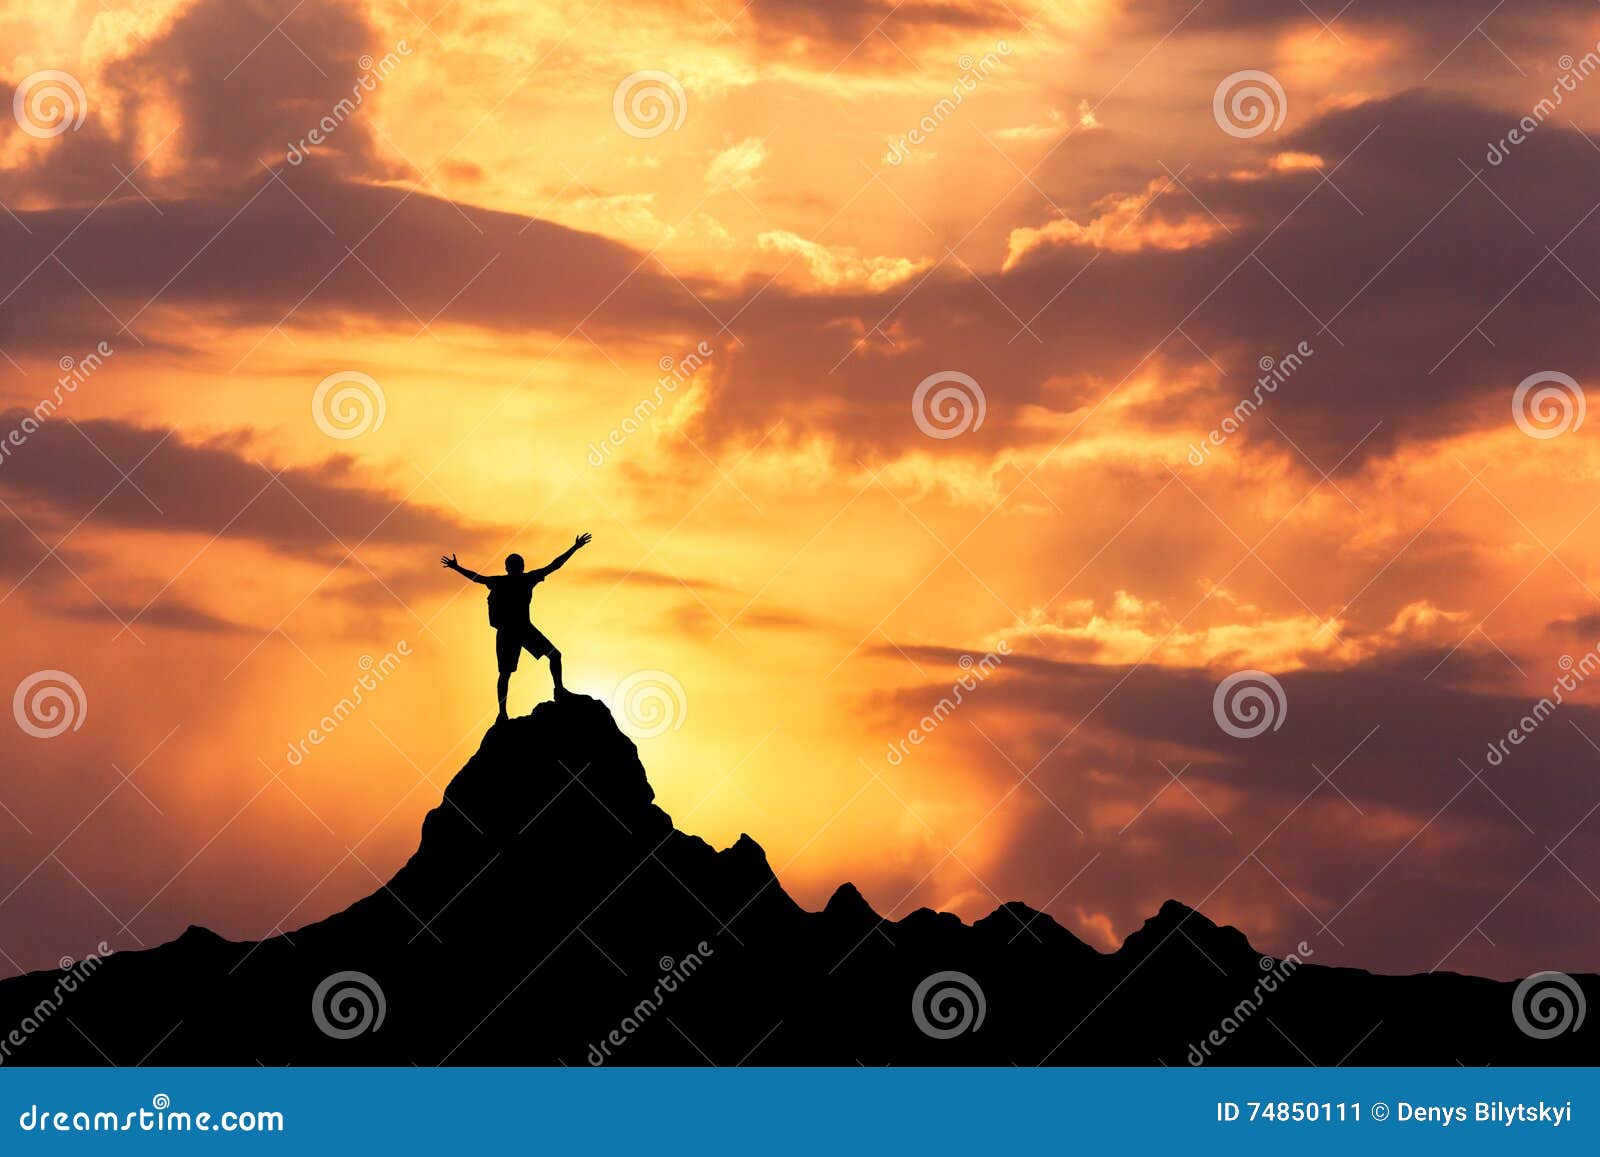 silhouette of a standing happy man on the mountain peak